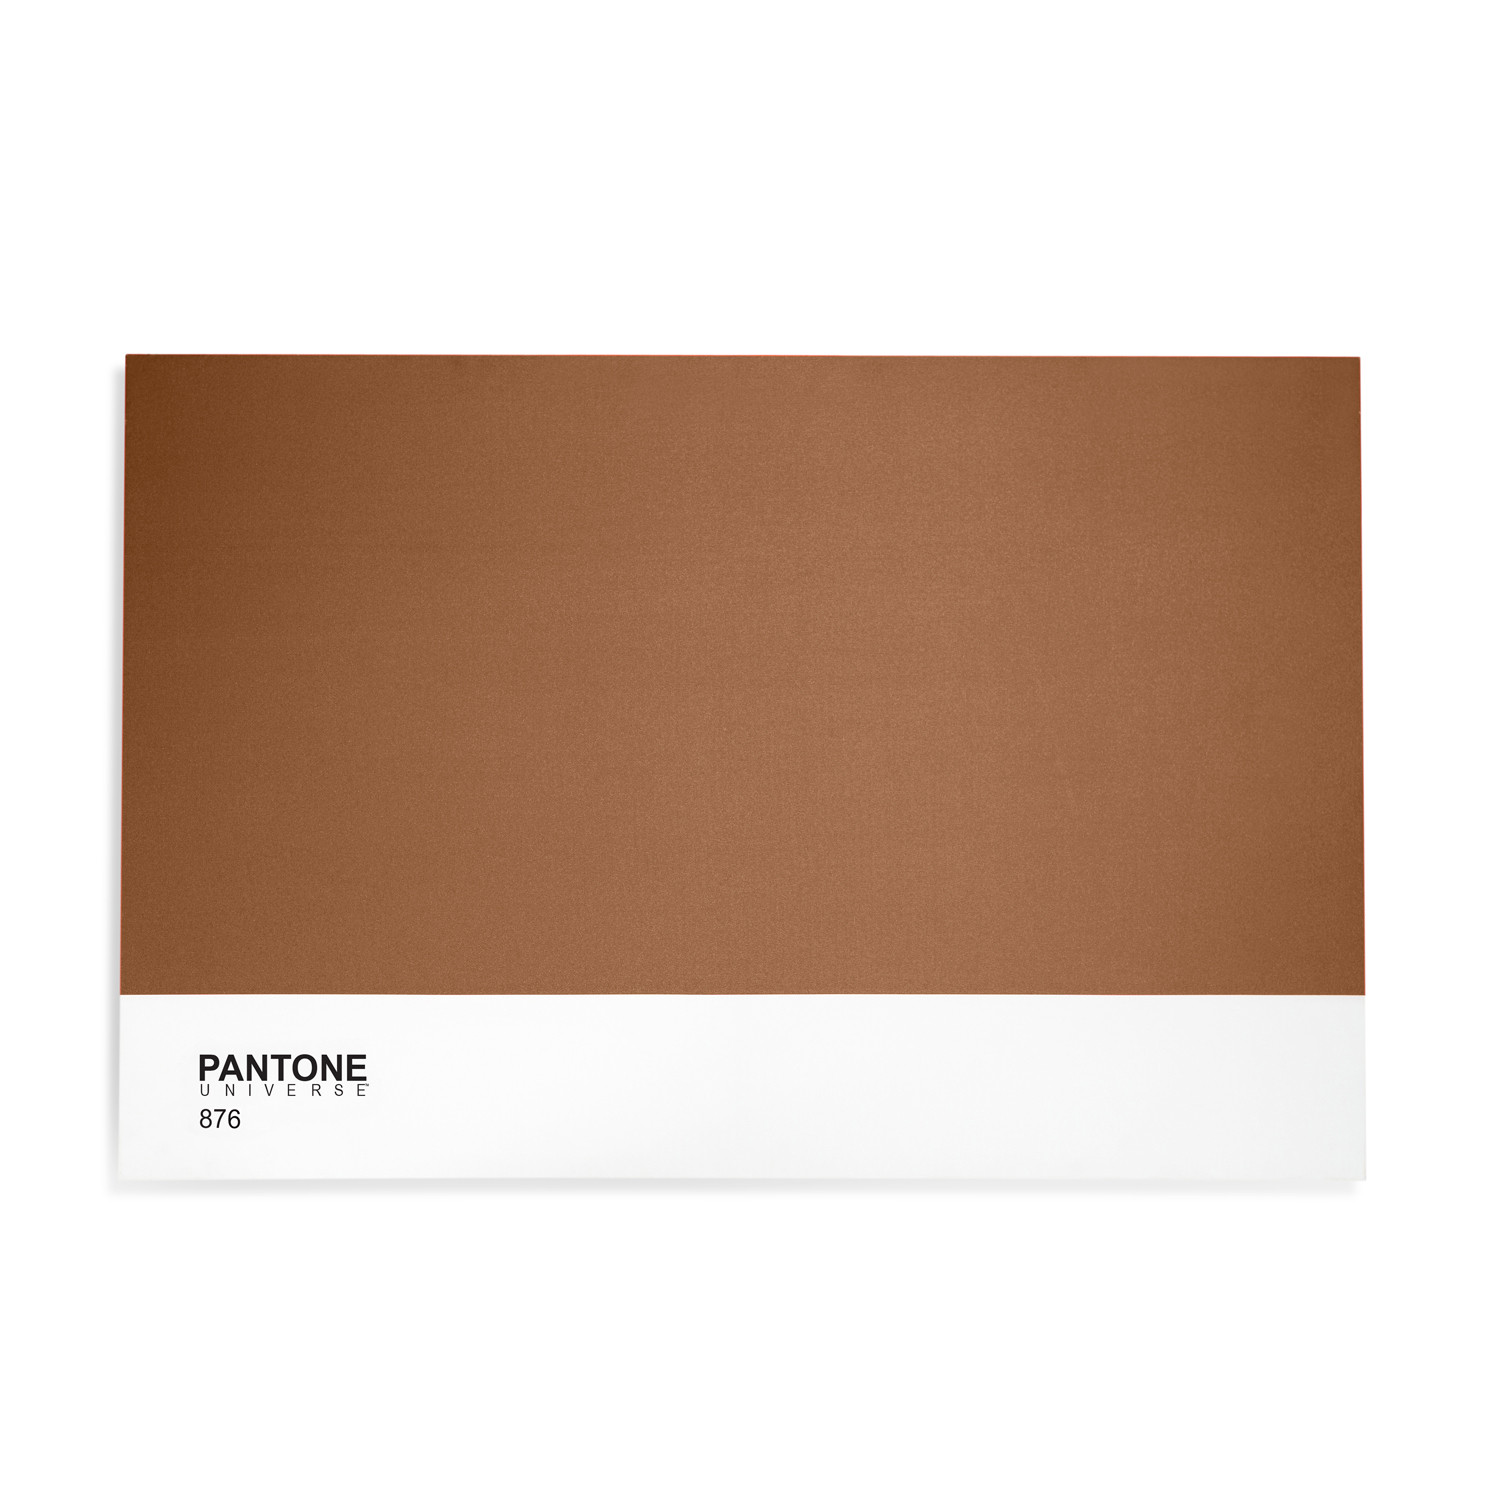 Limited Edition Collection Bronze 876 Pantone Touch Coloring Wallpapers Download Free Images Wallpaper [coloring436.blogspot.com]